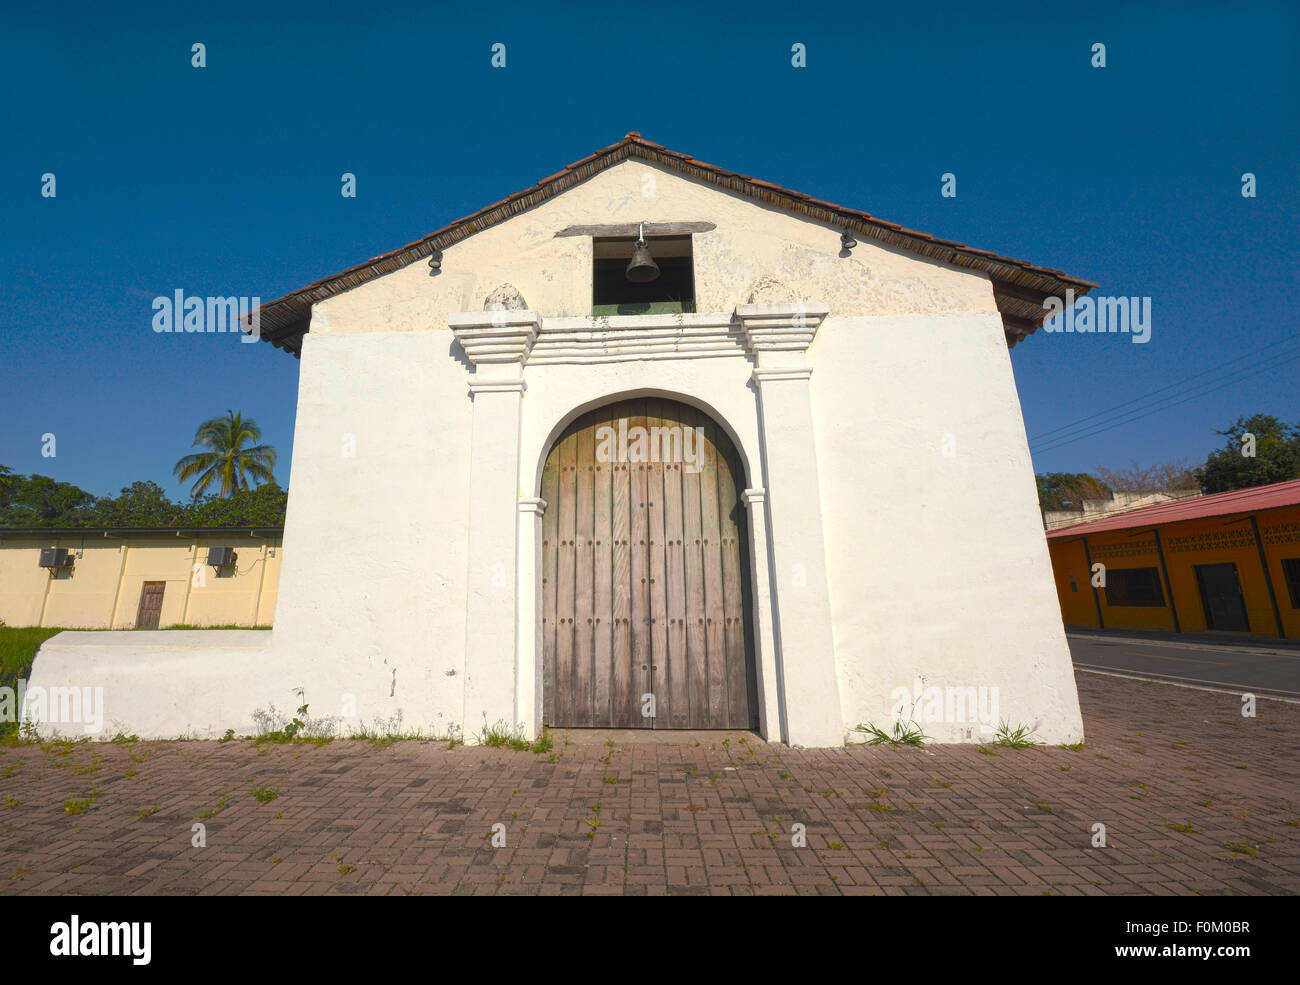 Saint John's Chapel at Nata de Los Caballeros in Panama, this is the first Chapel constructed by the Spaniards in the Pacific coa Stock Photo